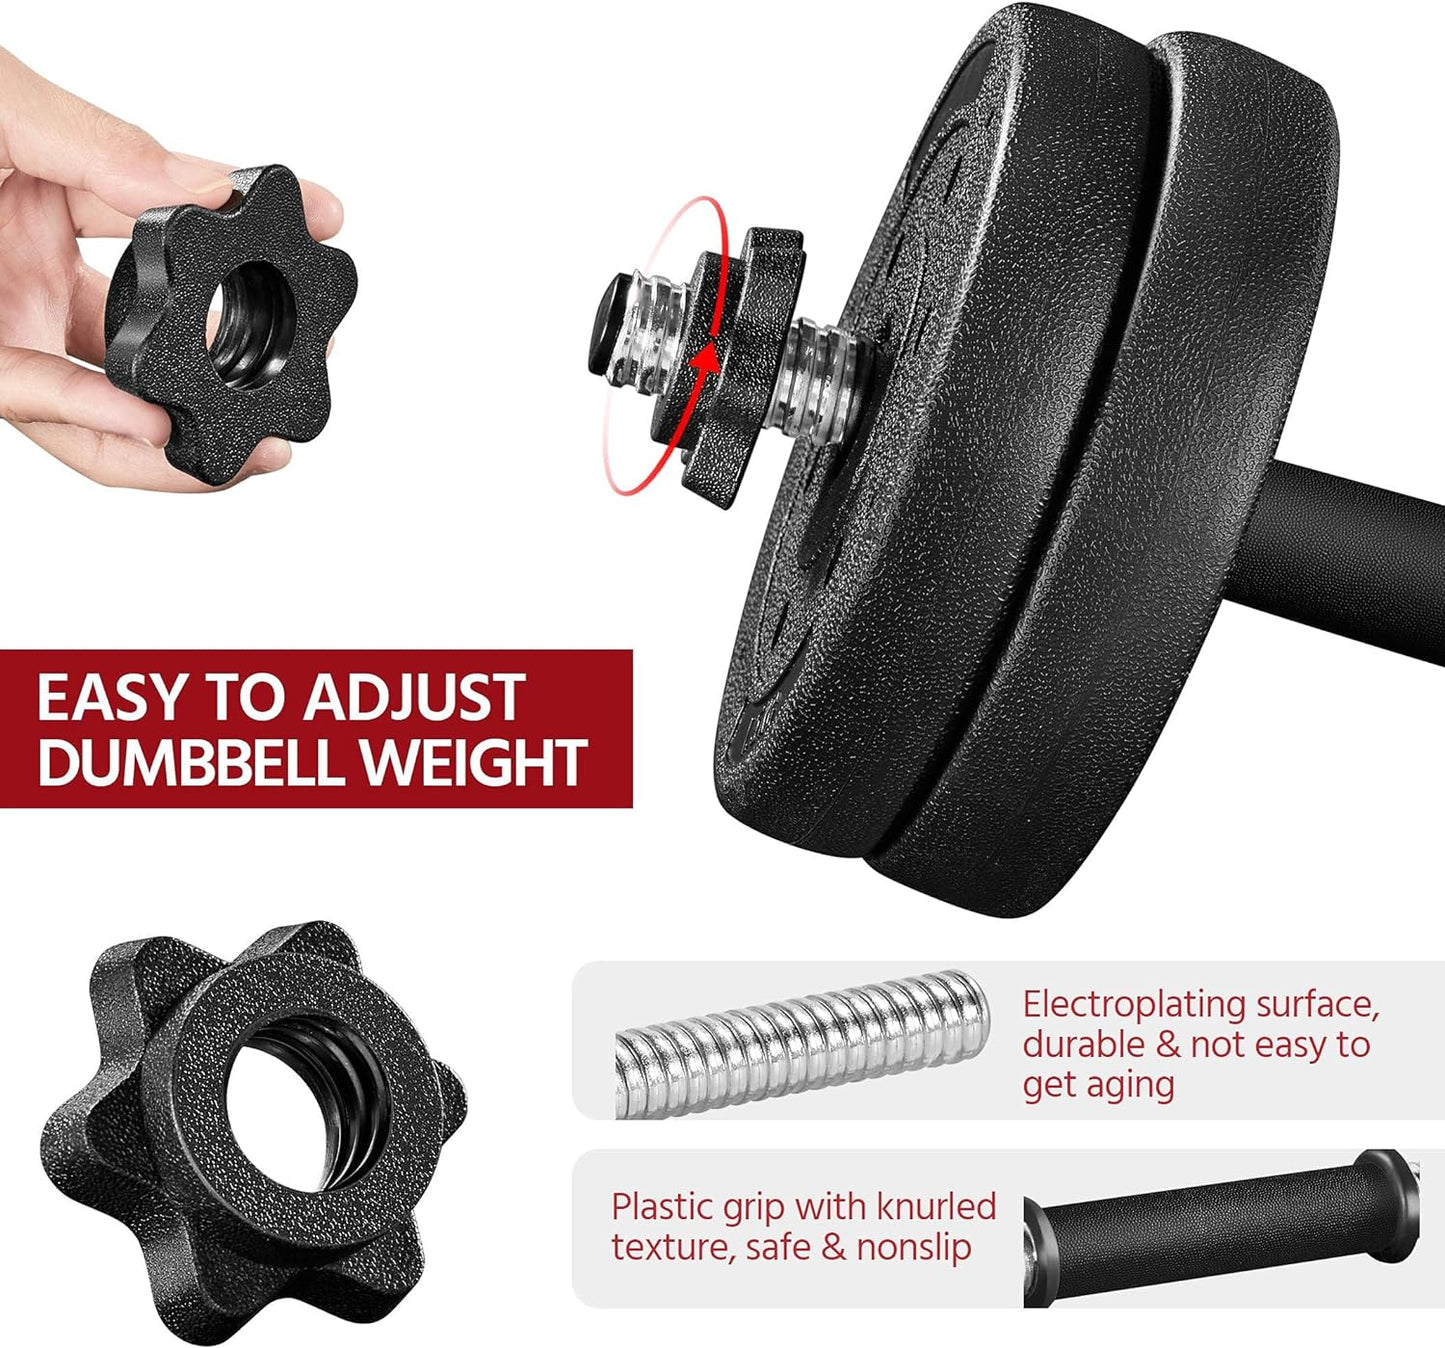 Yaheetech Adjustable Dumbbells Weight Set Dumbbell Weights Exercise & Fitness Equipment w\/ 4 Spinlock Collars & 2 Connector Options for Women & Men Gym Home Strength Bodybuilding Training 44LB\/66LB